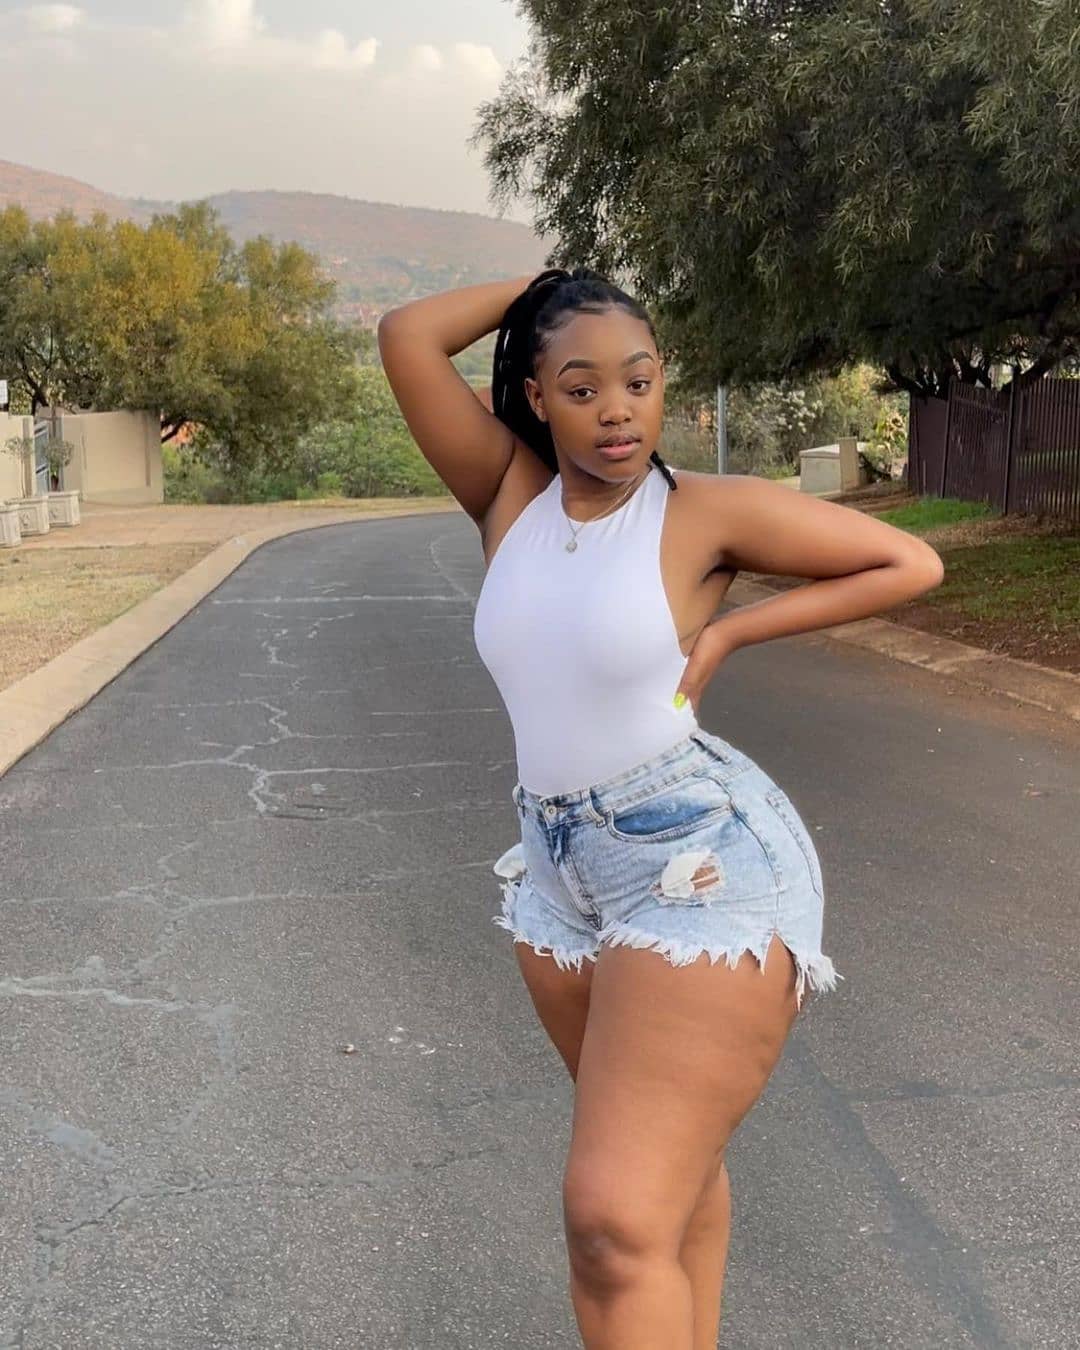 SMASH or PASS❔ on X: Would you SMASH or PASS?